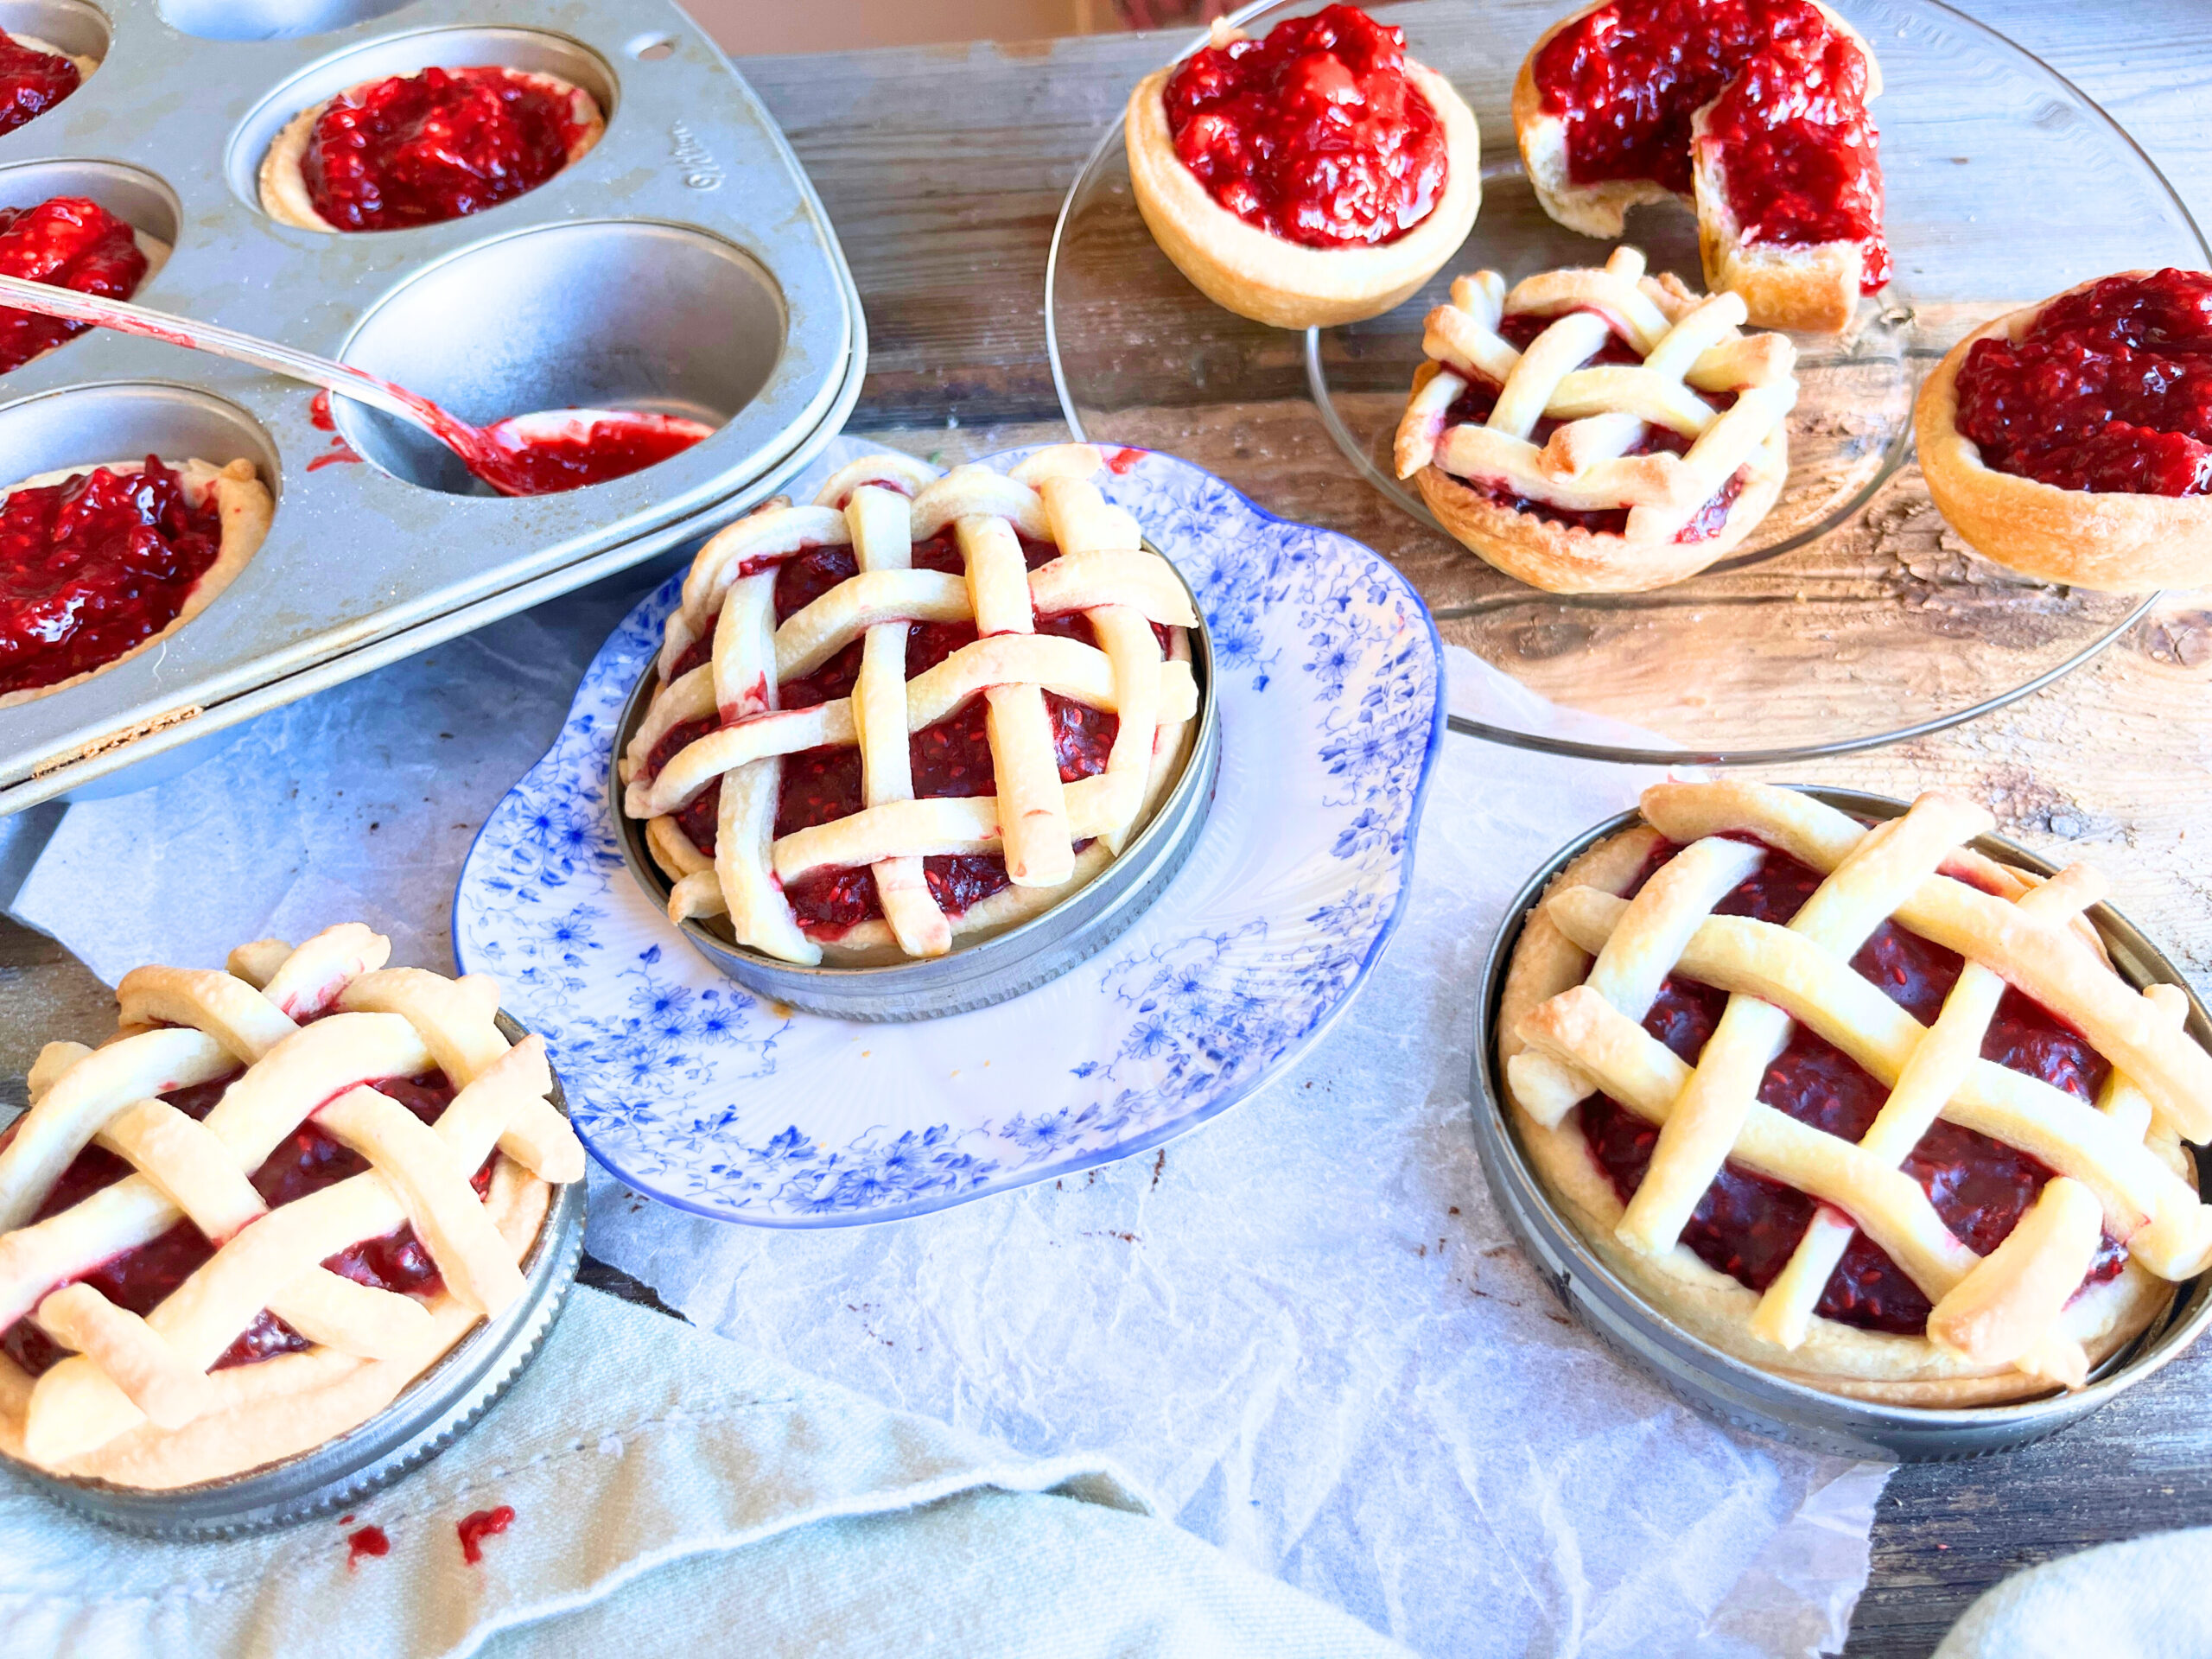 A wooden table with raspberry tarts on it. There are some with a lattice top and some with an open top. There is a muffin tray in the background.